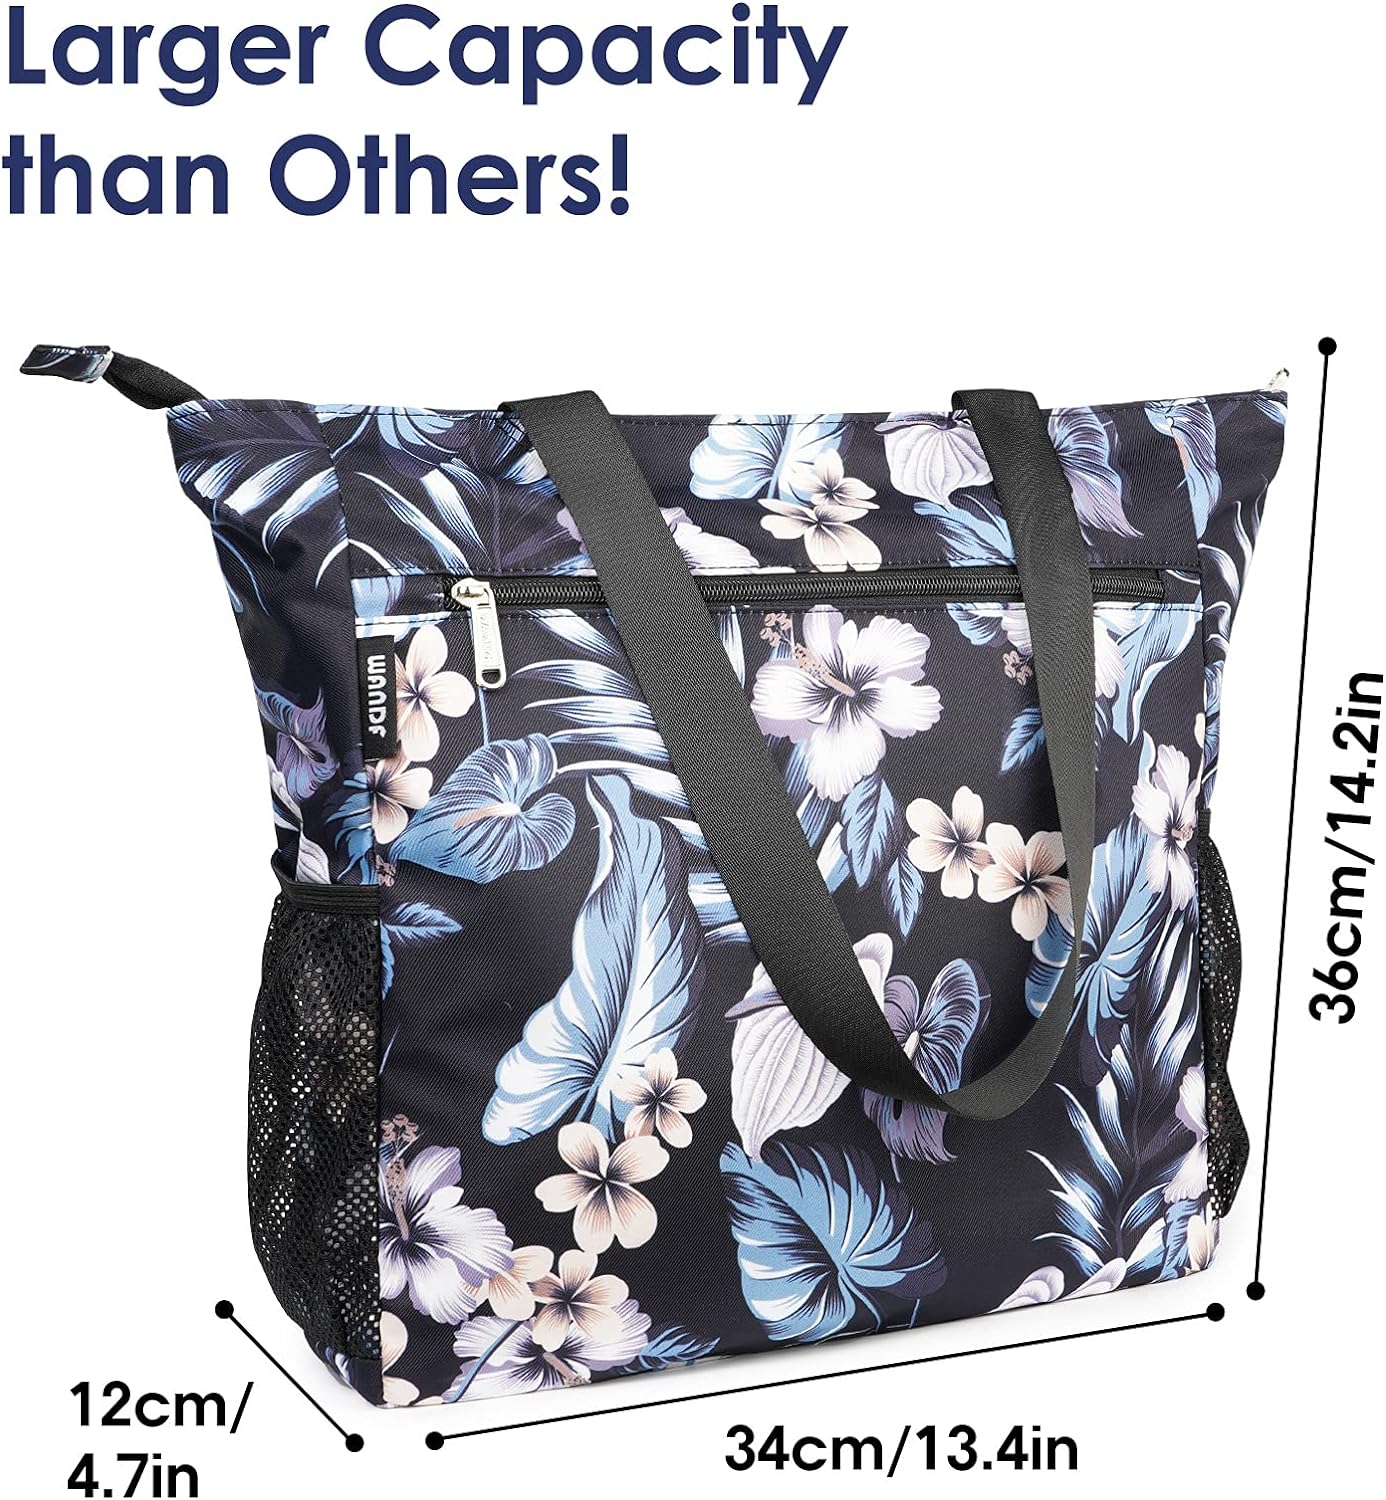 Floral Beach Tote Water-resistant Beach Bag Large Shoulder Bag for Yoga Travel with Multi Pockets 